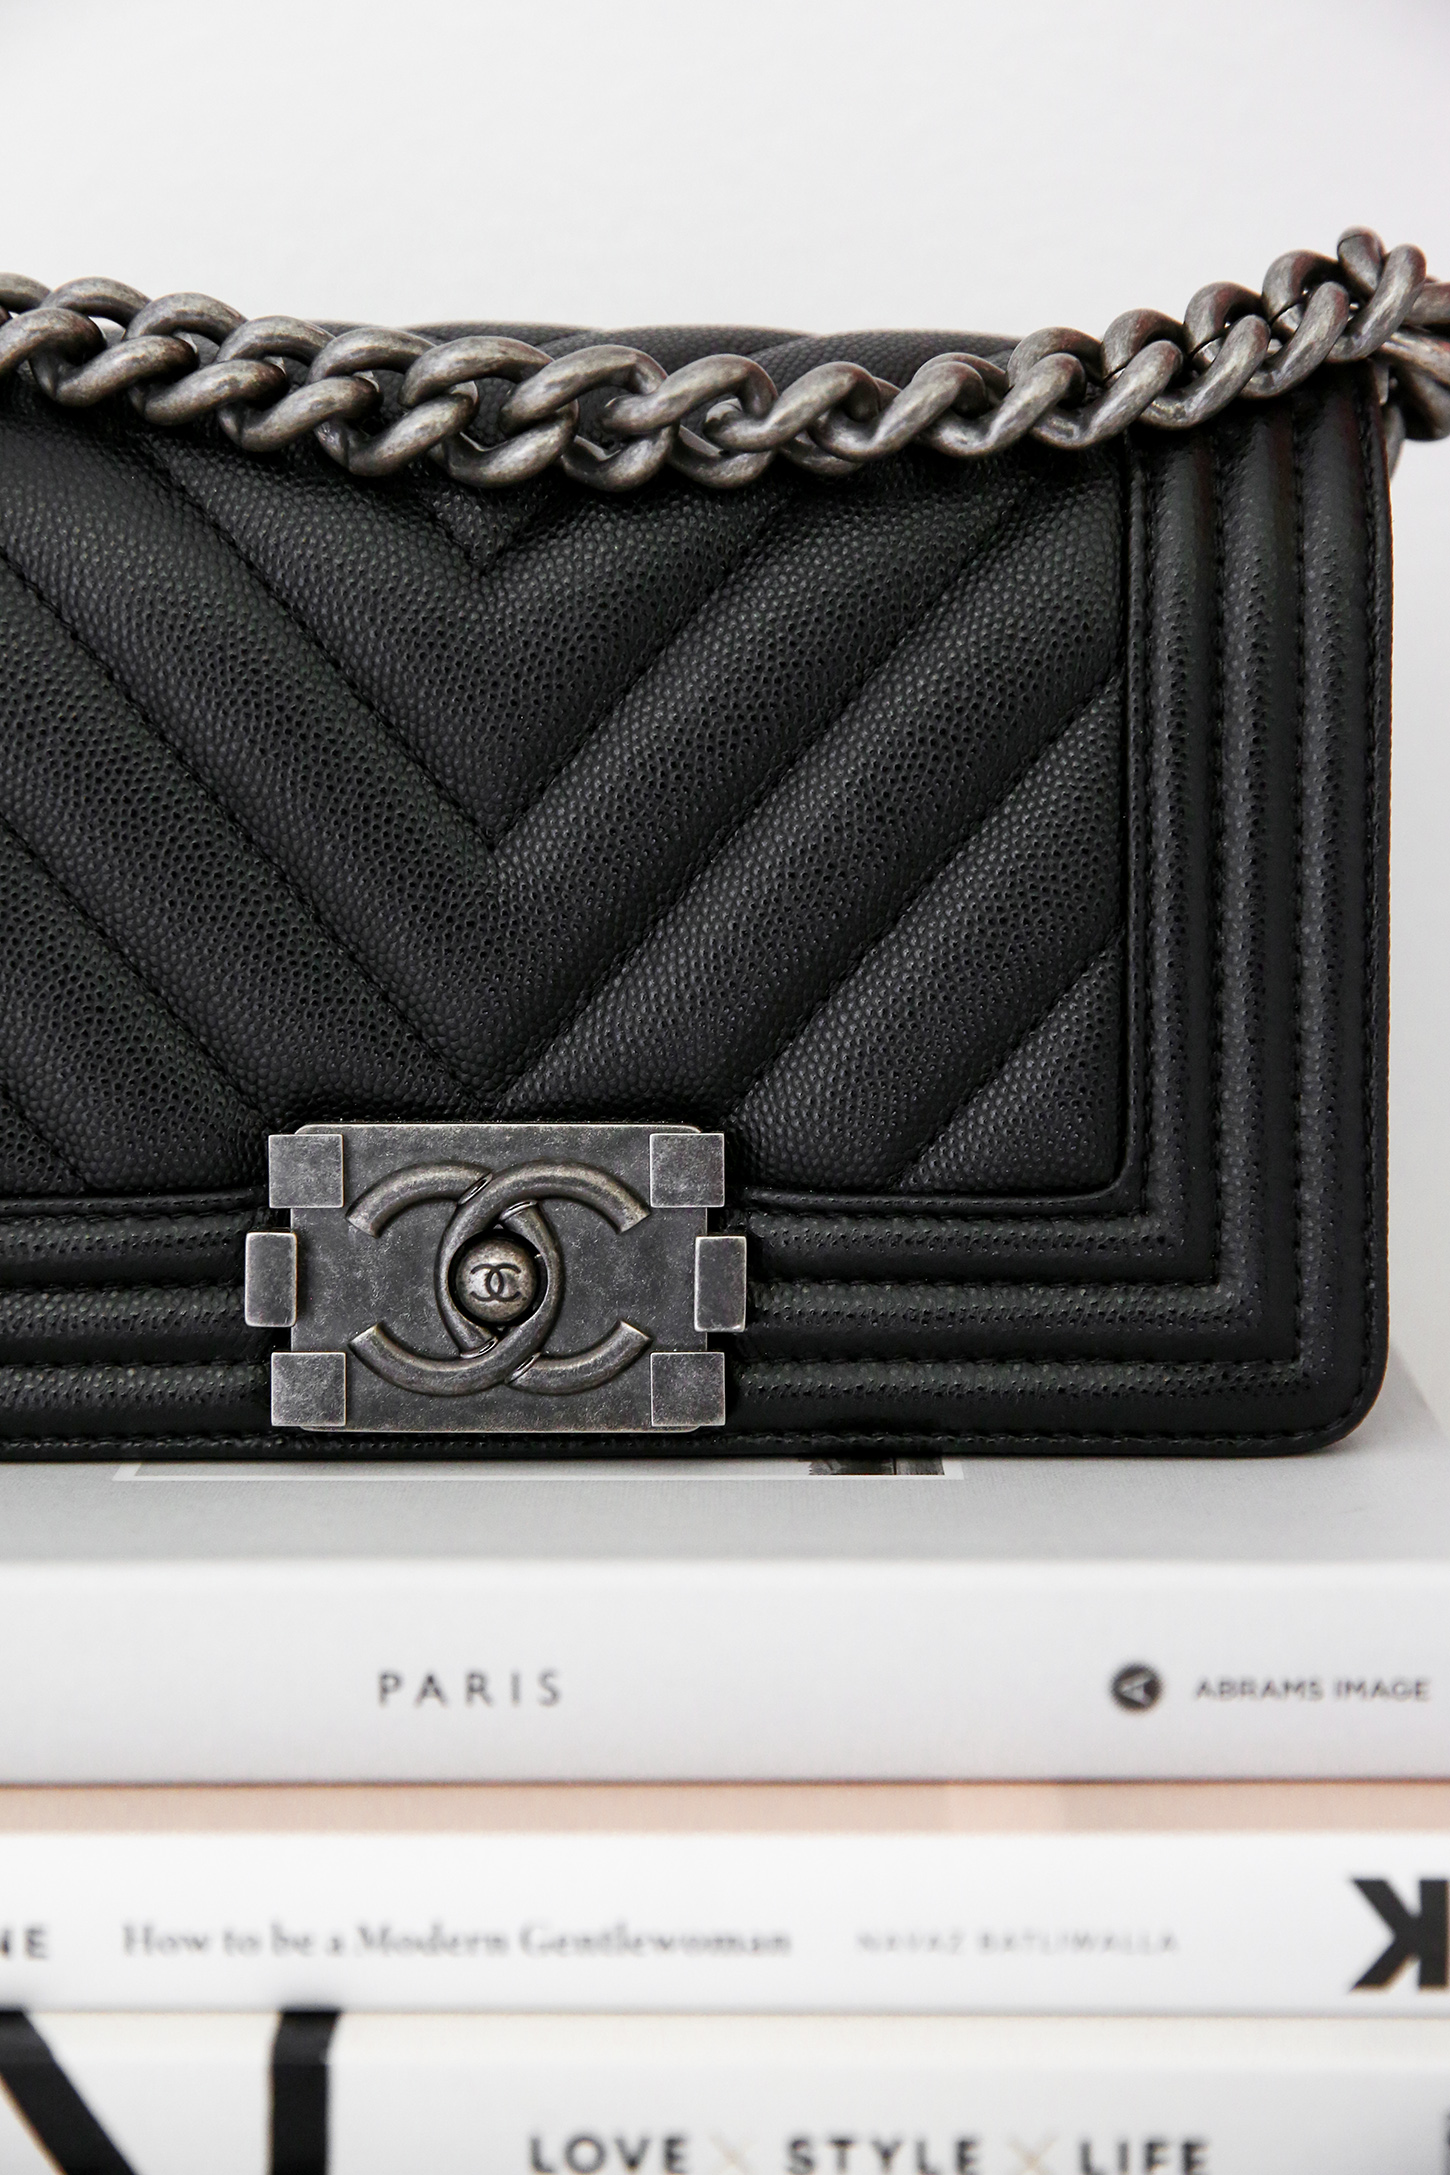 Chanel Boy Bag Review  Mad about the Small Boy  Unwrapped